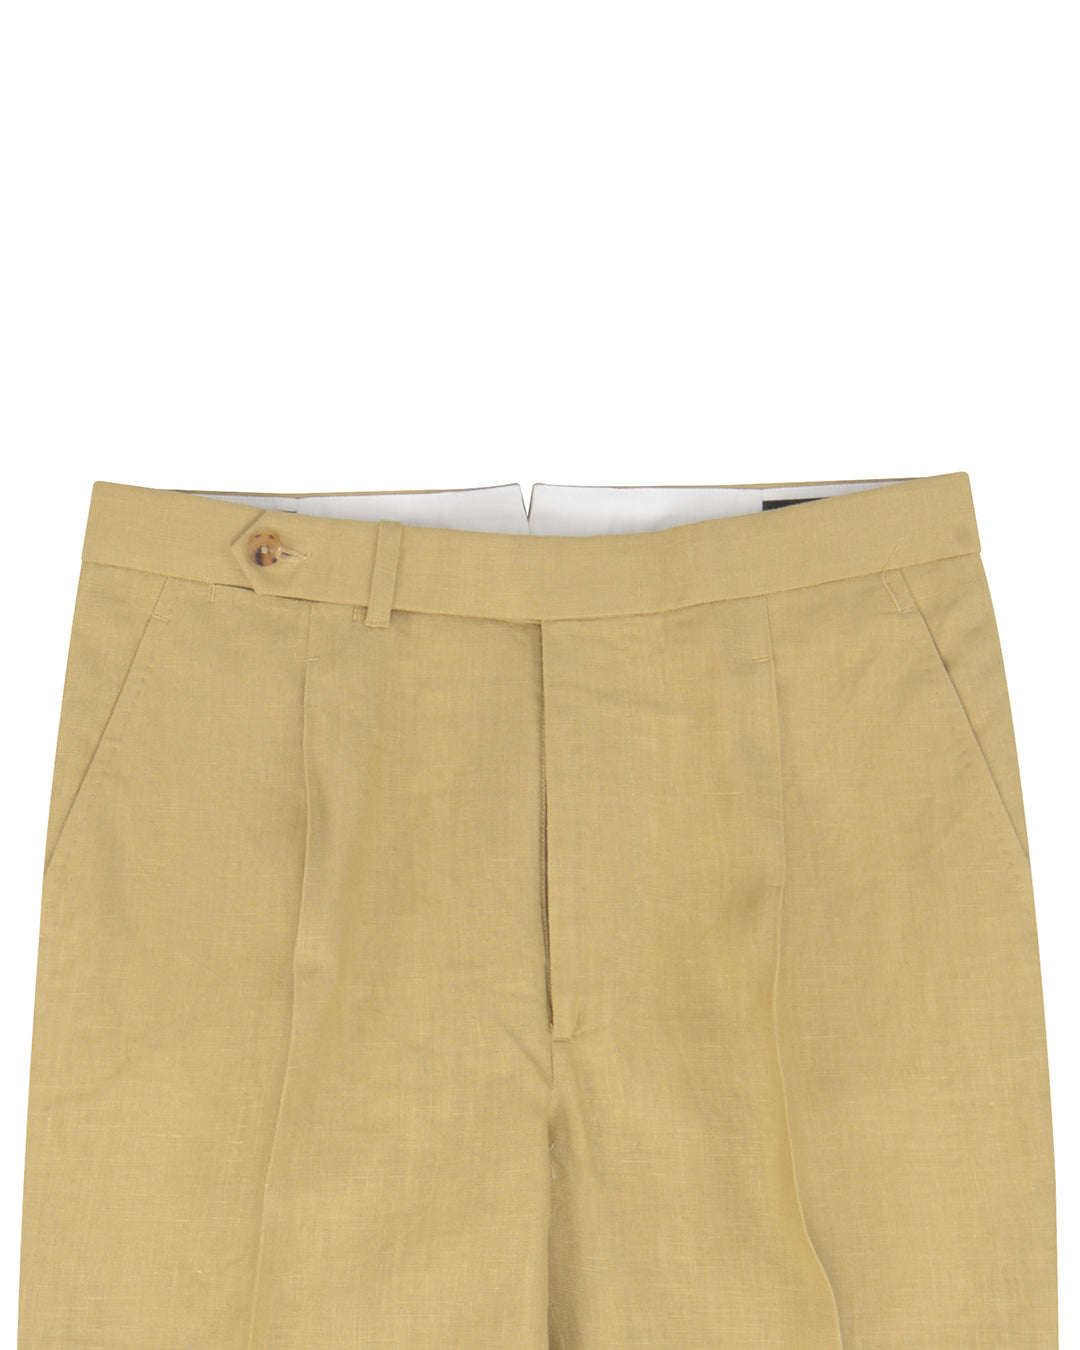 Front view of custom linen pants for men by Luxire in golden yellow